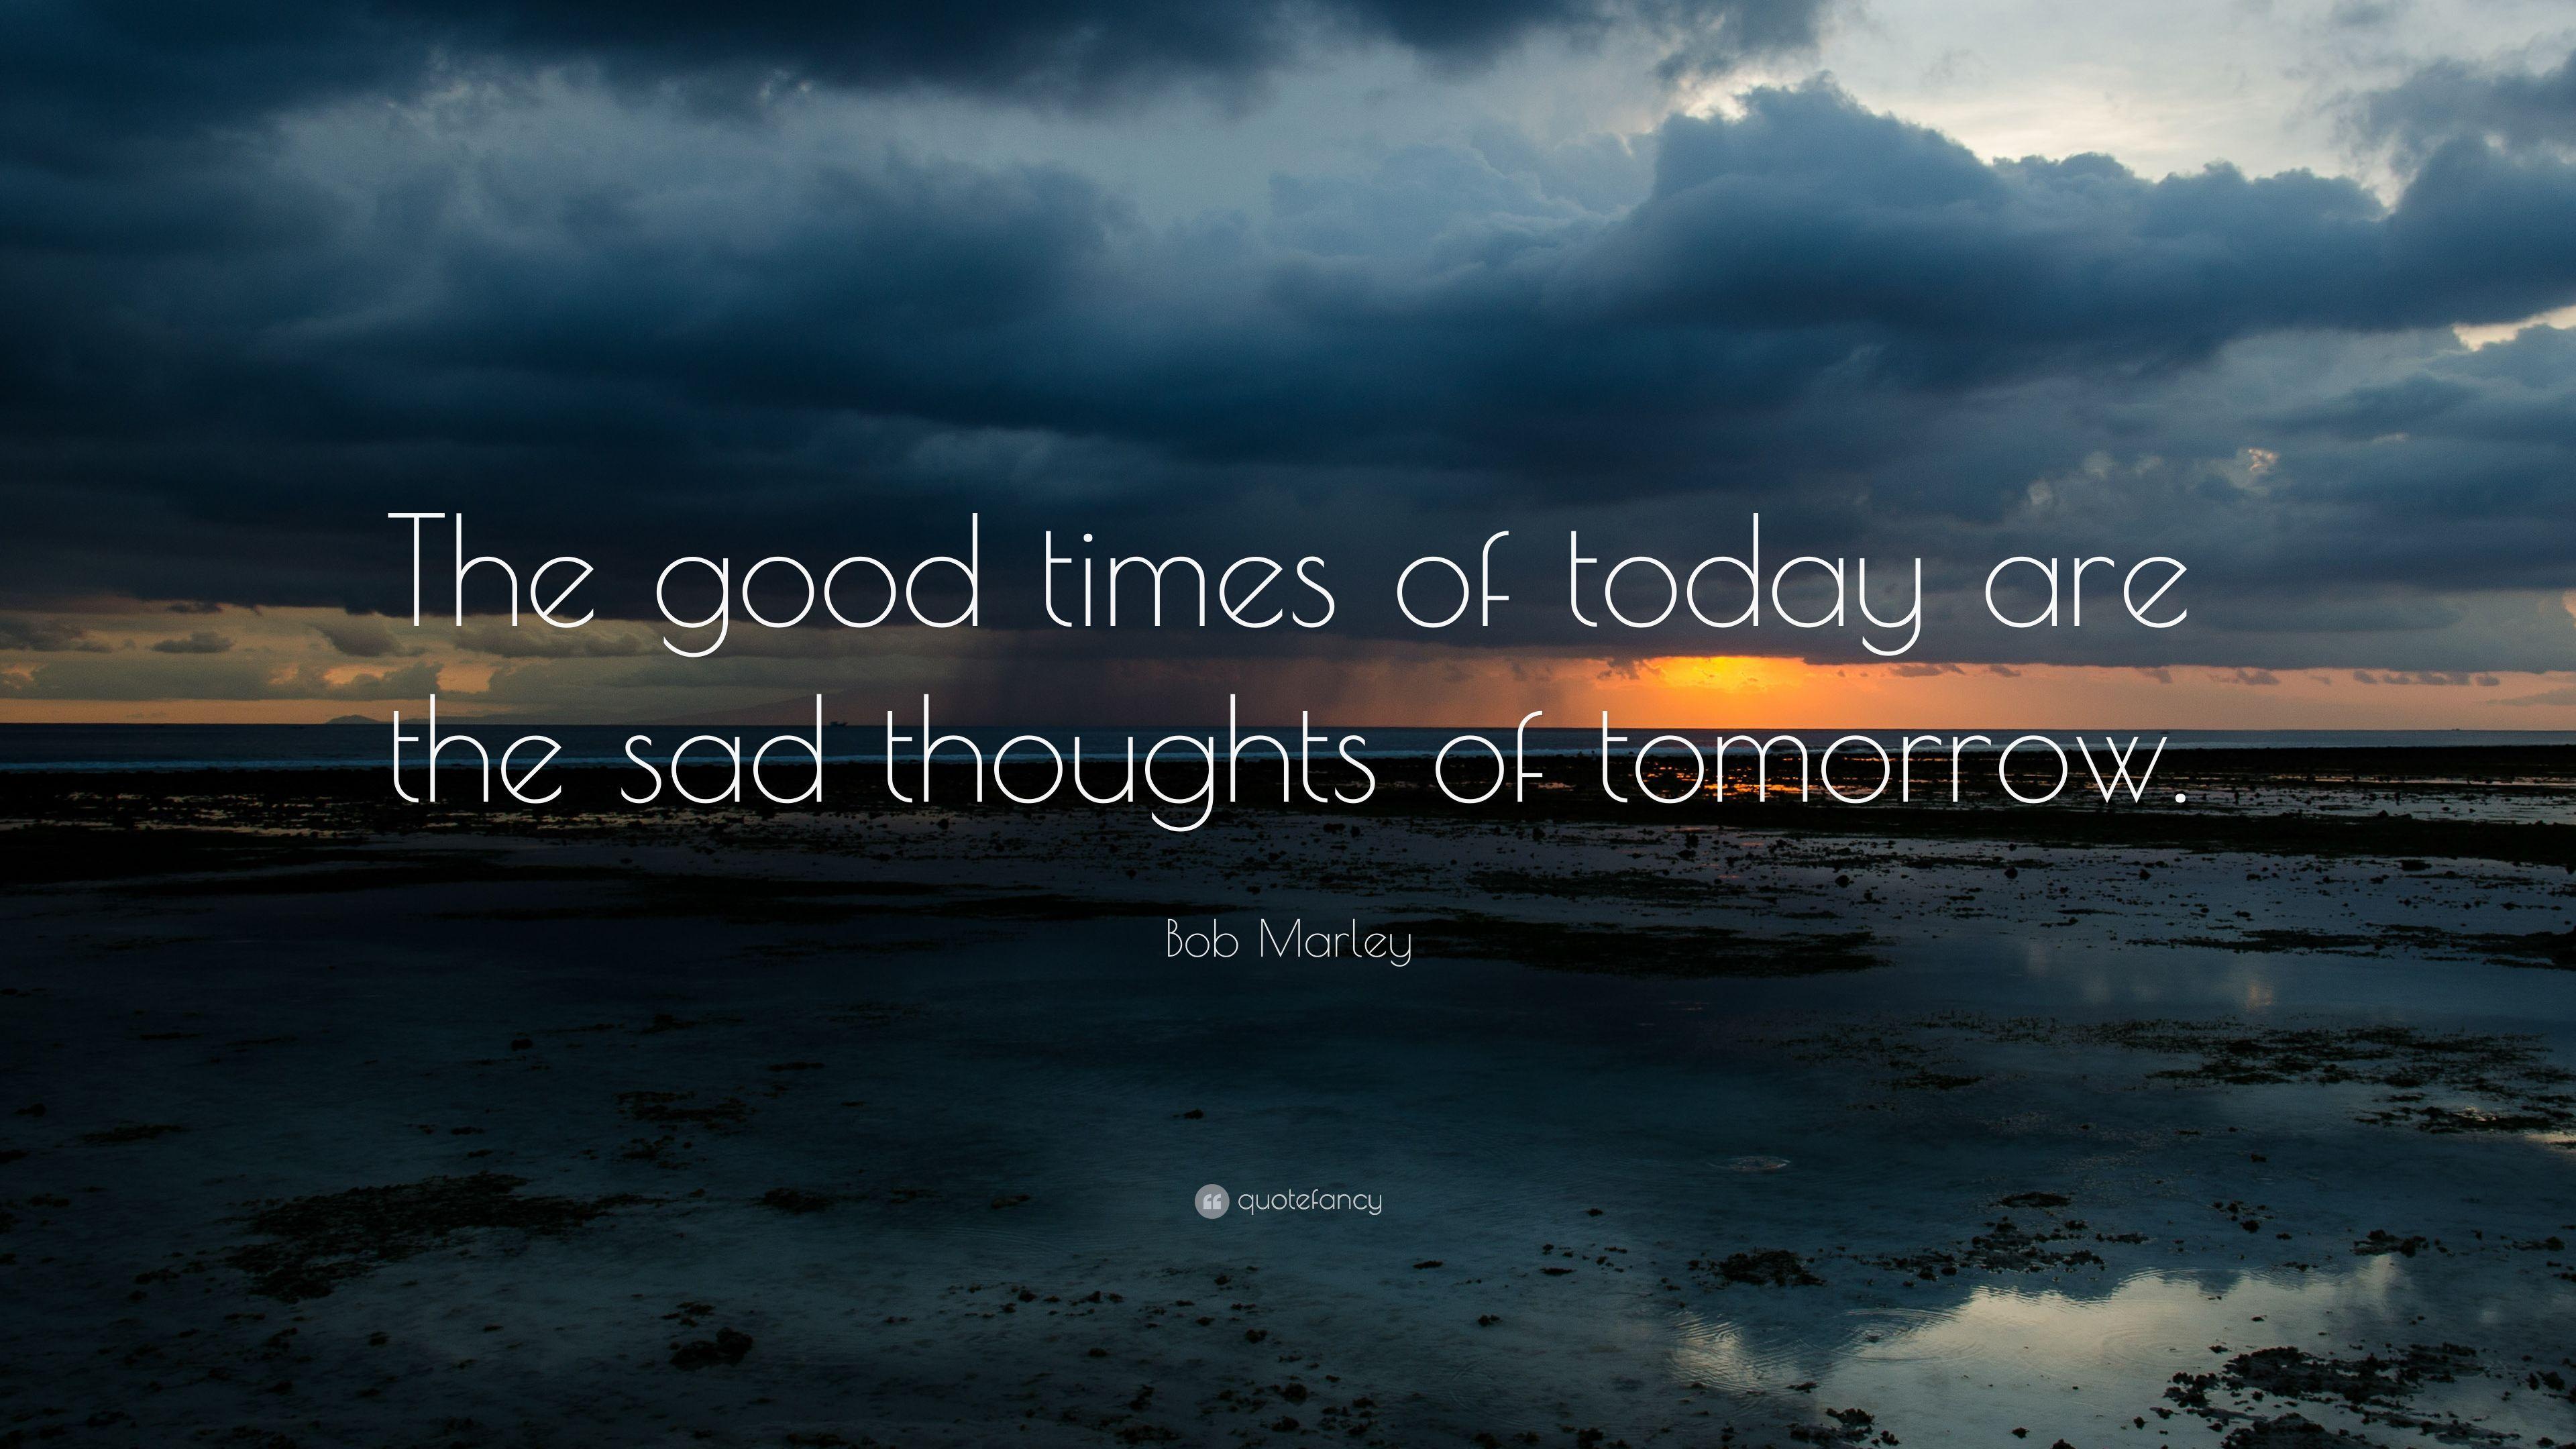 Bob Marley Quote: “The good times of today are the sad thoughts